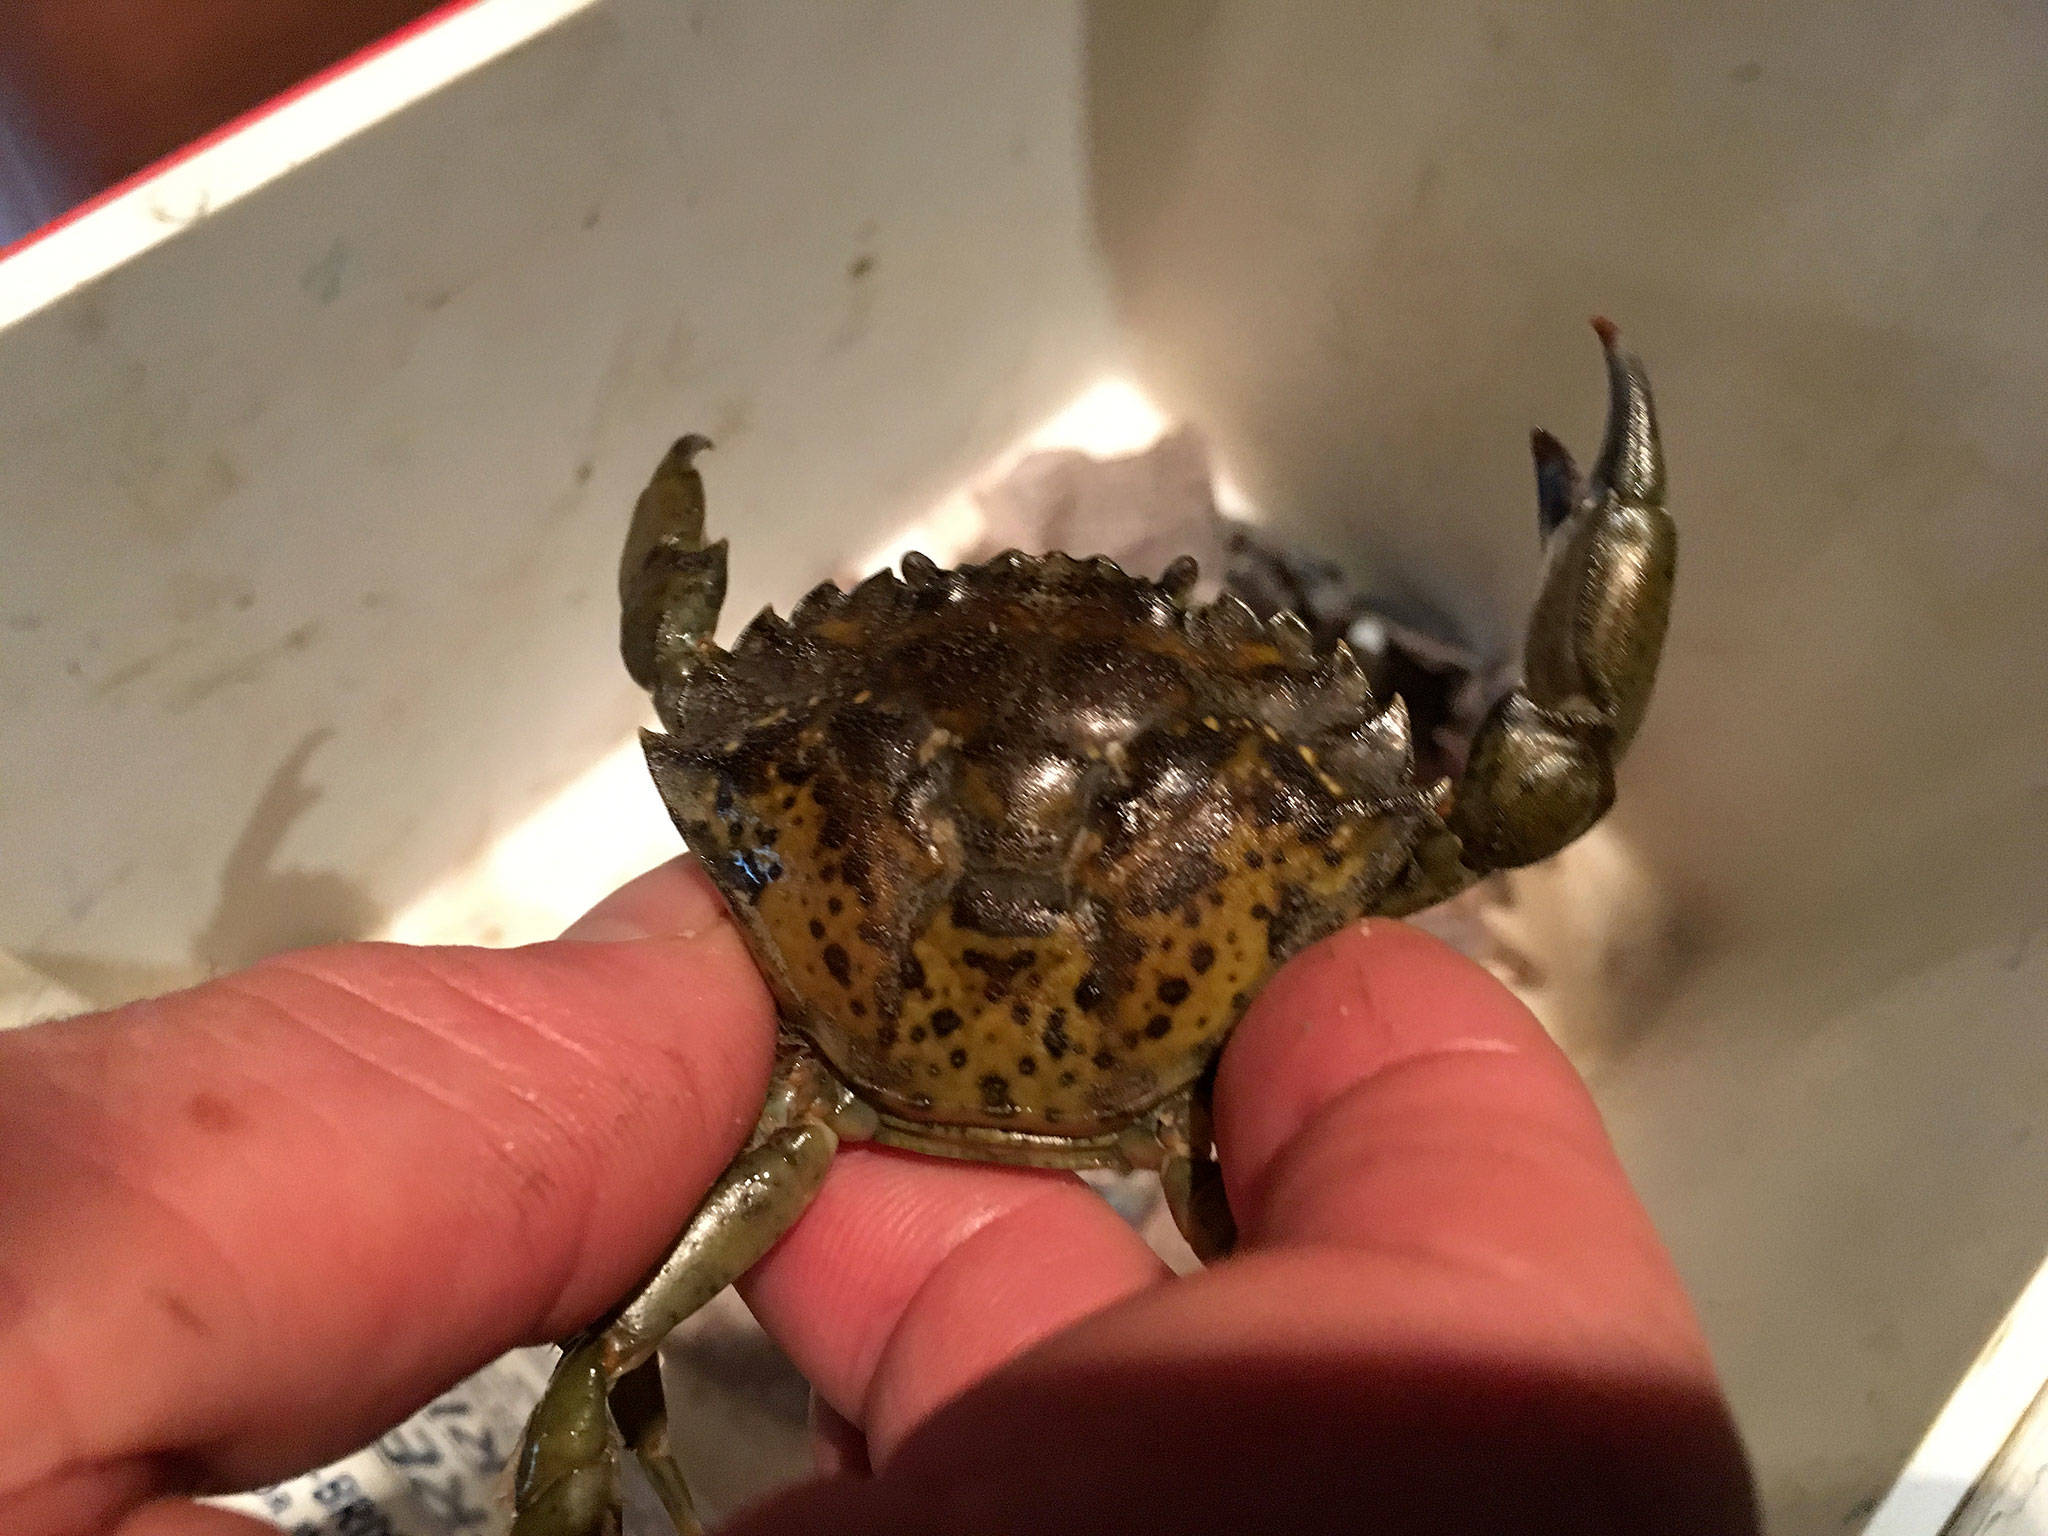 Researchers report they’ve captured 60 European green crabs, an invasive species, at Graveyard Spit on the Dungeness Spit as of Thursday. This green crab was one of four found in early May that was sent to Massachusetts for research purposes to determine if it came from British Columbia, California or elsewhere. (Matthew Nash/Olympic Peninsula News Group)